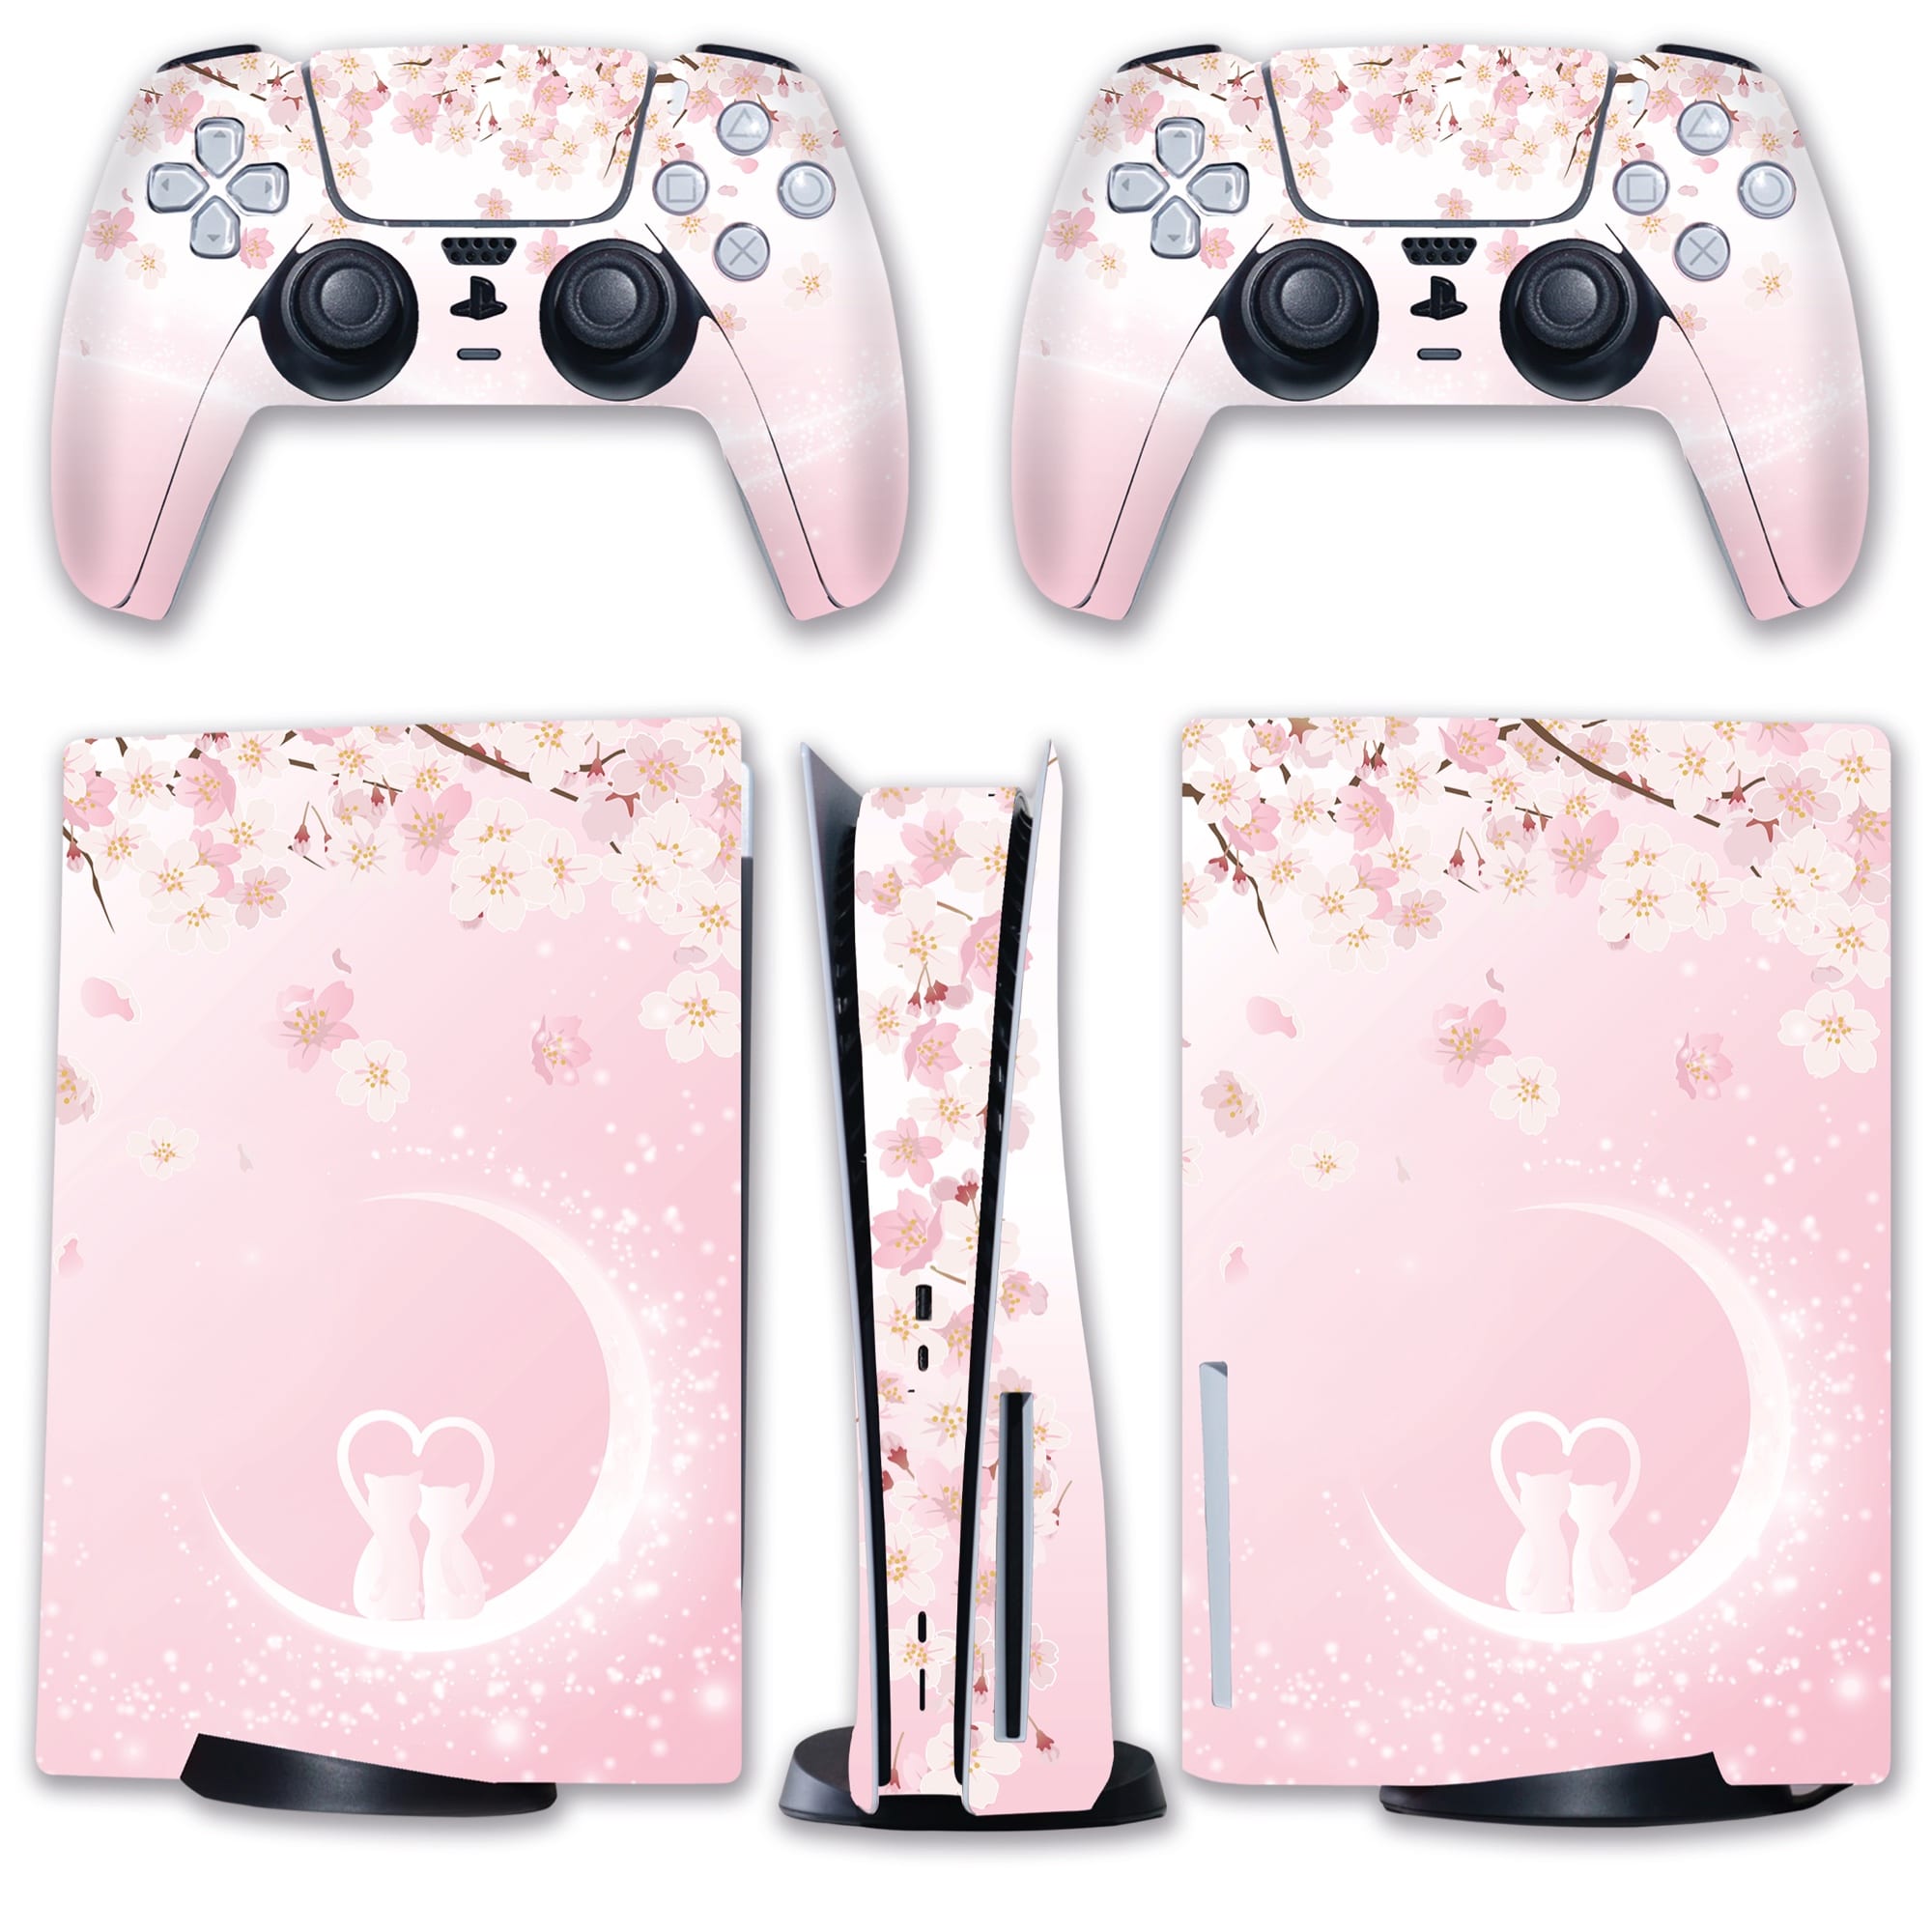 Decal Skin for PS5 Digital, Whole Body Vinyl Sticker Cover for